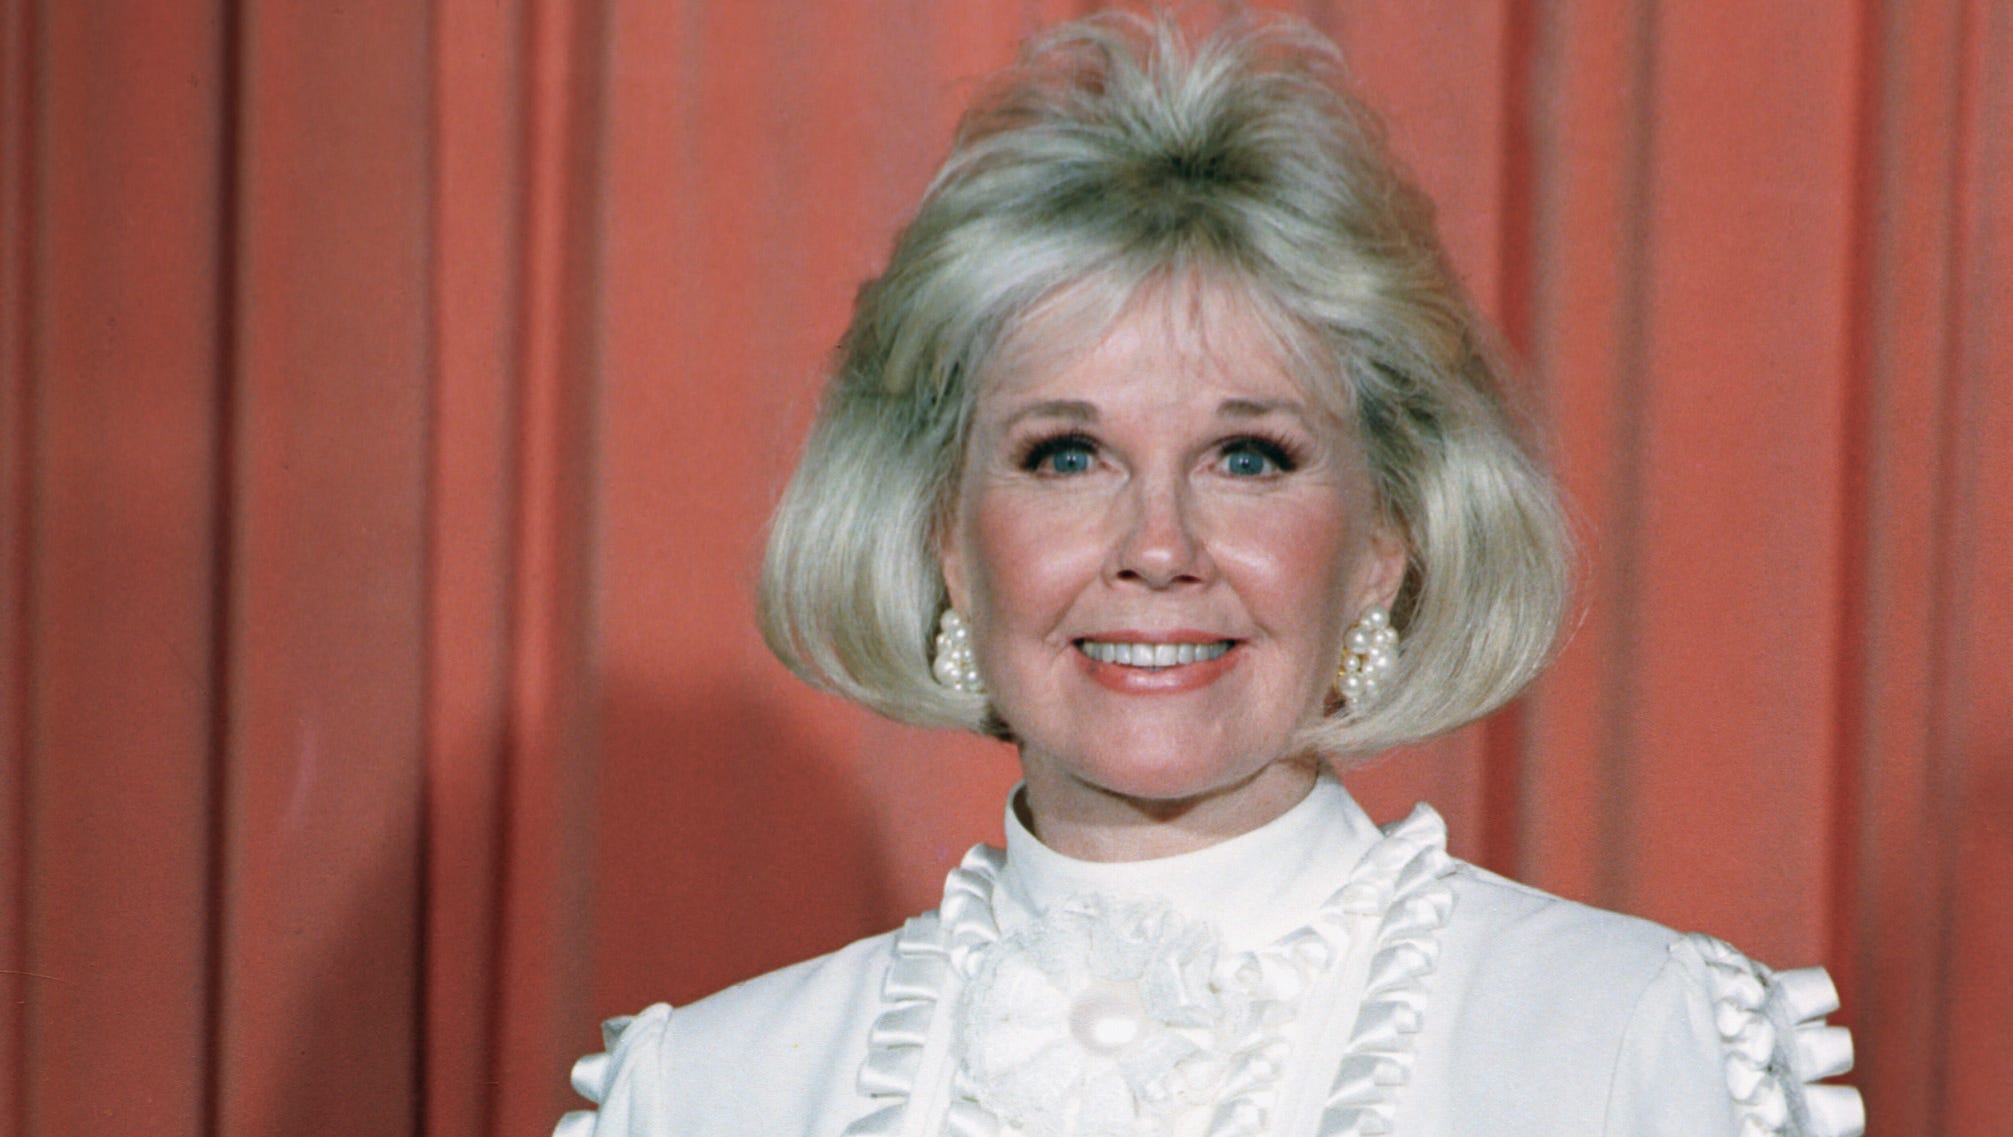 Doris Day is actually 95. Who knew? Not even her